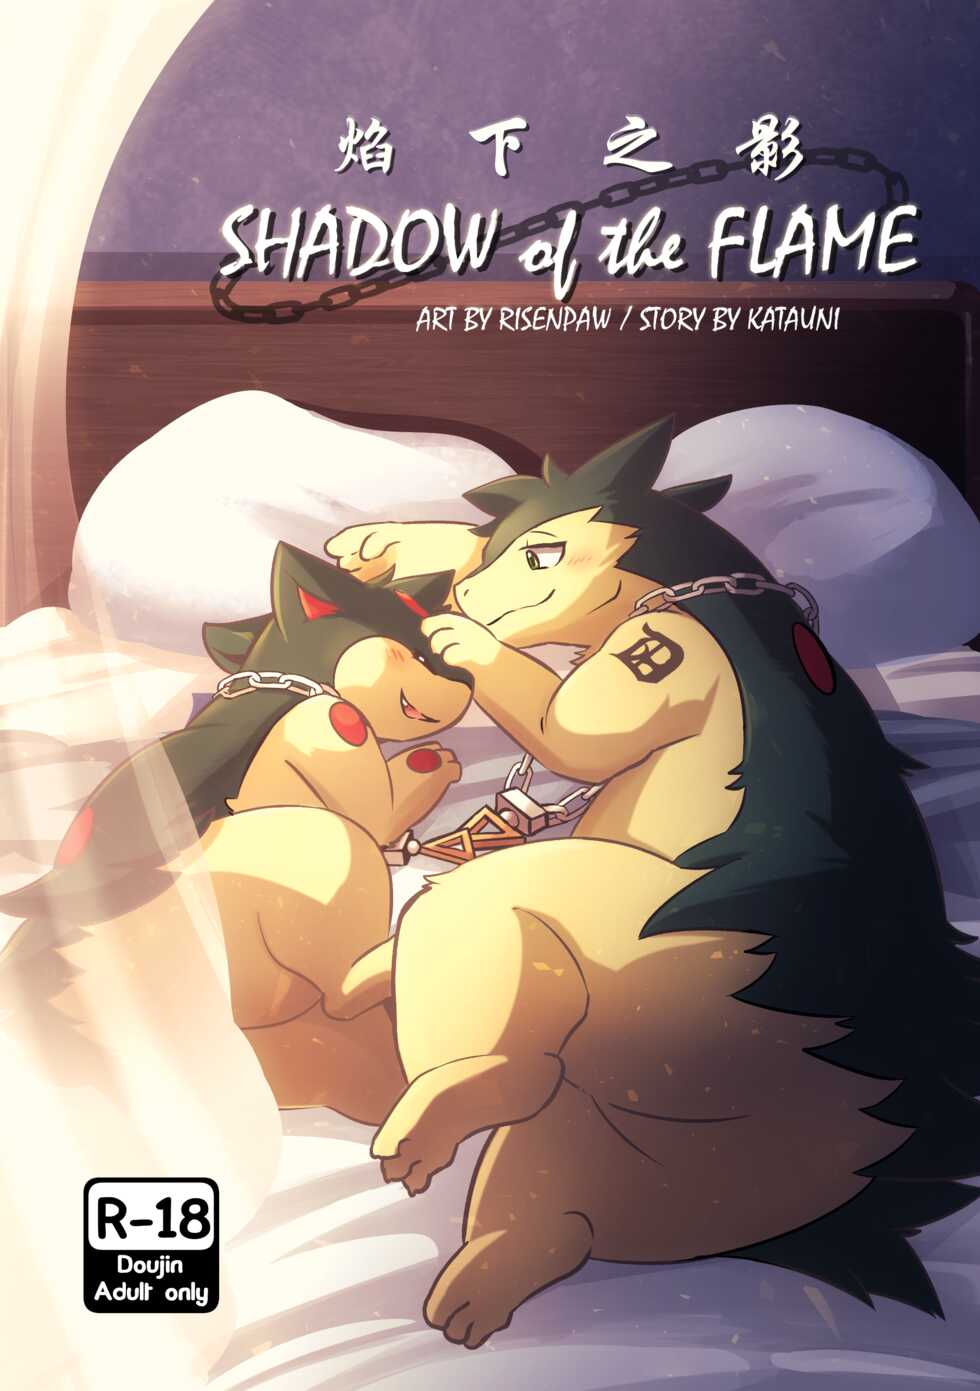 [Risenpaw] Shadow of the Flame - 焰下之影[Bx10ear个人汉化] - Page 1